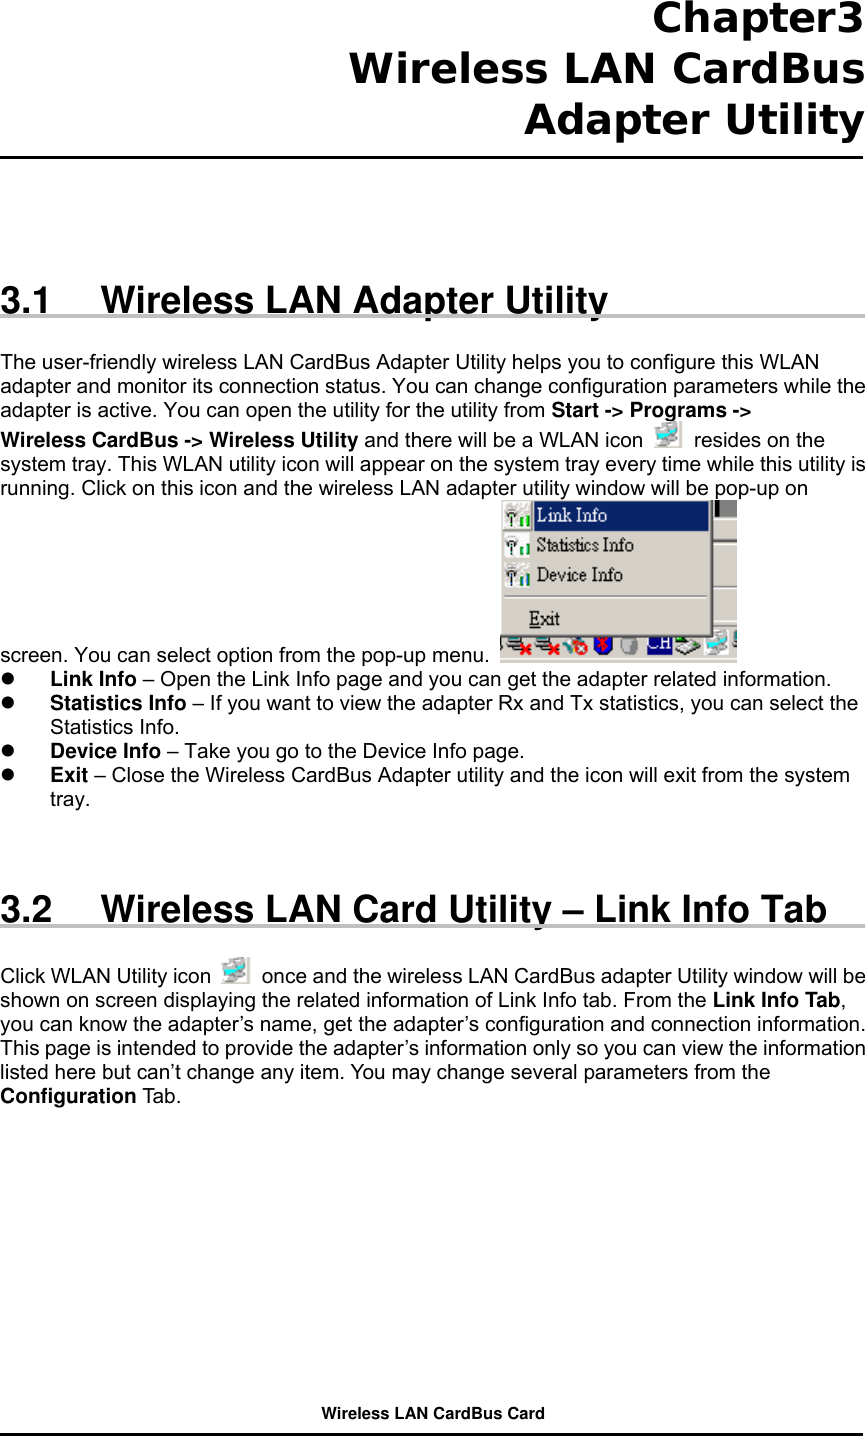  Chapter3  Wireless LAN CardBus Adapter Utility      3.1  Wireless LAN Adapter Utility  The user-friendly wireless LAN CardBus Adapter Utility helps you to configure this WLAN adapter and monitor its connection status. You can change configuration parameters while the adapter is active. You can open the utility for the utility from Start -&gt; Programs -&gt; Wireless CardBus -&gt; Wireless Utility and there will be a WLAN icon    resides on the system tray. This WLAN utility icon will appear on the system tray every time while this utility is running. Click on this icon and the wireless LAN adapter utility window will be pop-up on screen. You can select option from the pop-up menu.      Link Info – Open the Link Info page and you can get the adapter related information.     Statistics Info – If you want to view the adapter Rx and Tx statistics, you can select the Statistics Info.   Device Info – Take you go to the Device Info page.     Exit – Close the Wireless CardBus Adapter utility and the icon will exit from the system tray.    3.2  Wireless LAN Card Utility – Link Info Tab  Click WLAN Utility icon    once and the wireless LAN CardBus adapter Utility window will be shown on screen displaying the related information of Link Info tab. From the Link Info Tab, you can know the adapter’s name, get the adapter’s configuration and connection information. This page is intended to provide the adapter’s information only so you can view the information listed here but can’t change any item. You may change several parameters from the Configuration Tab.  Wireless LAN CardBus Card 